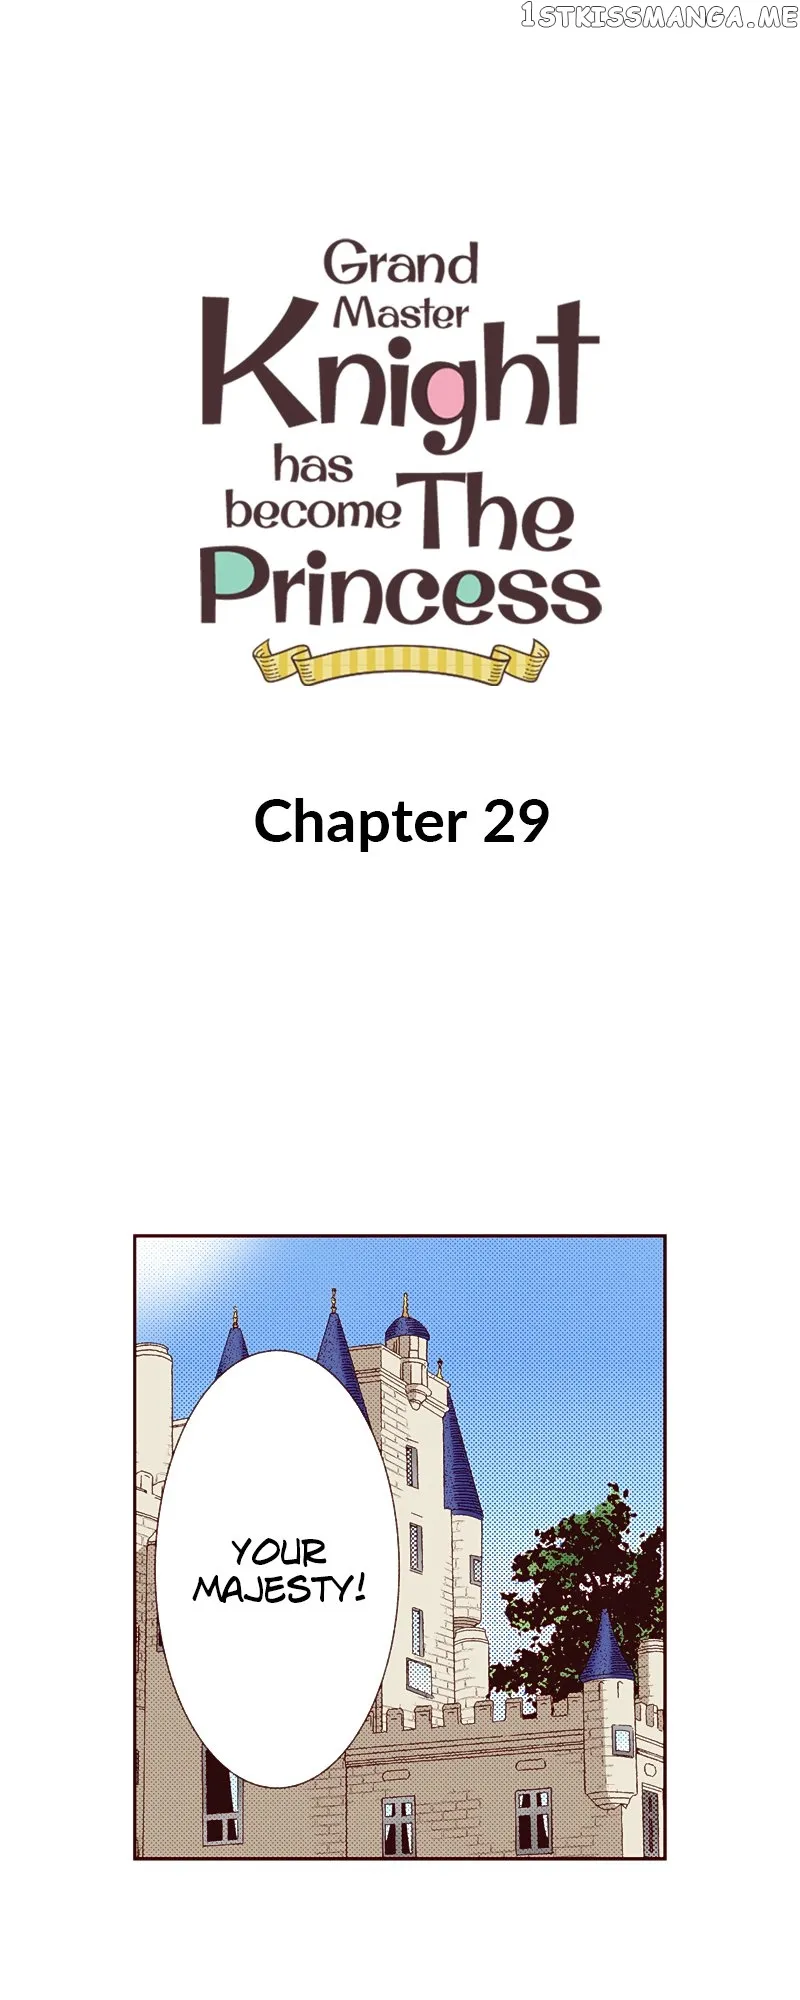 Grand Master Knight Has Become the Princess chapter 29